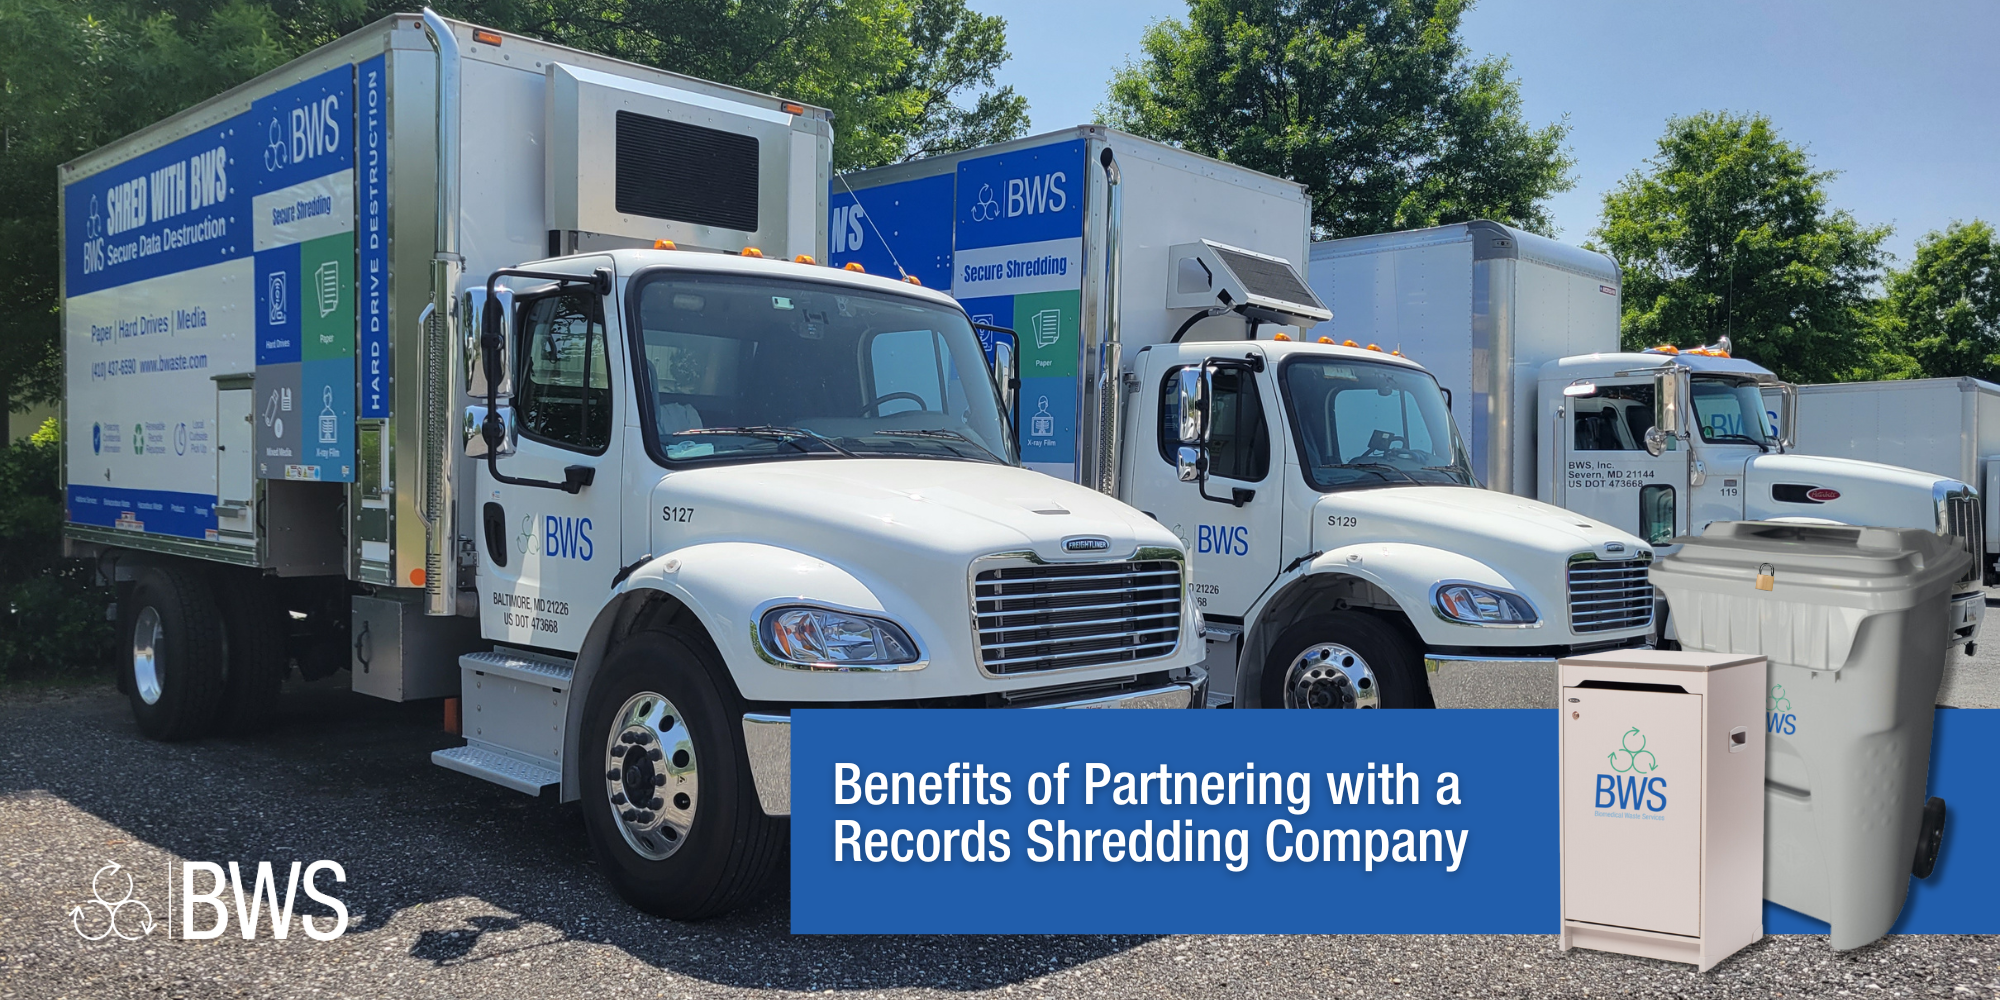 Partnering with a Document Shredding Company